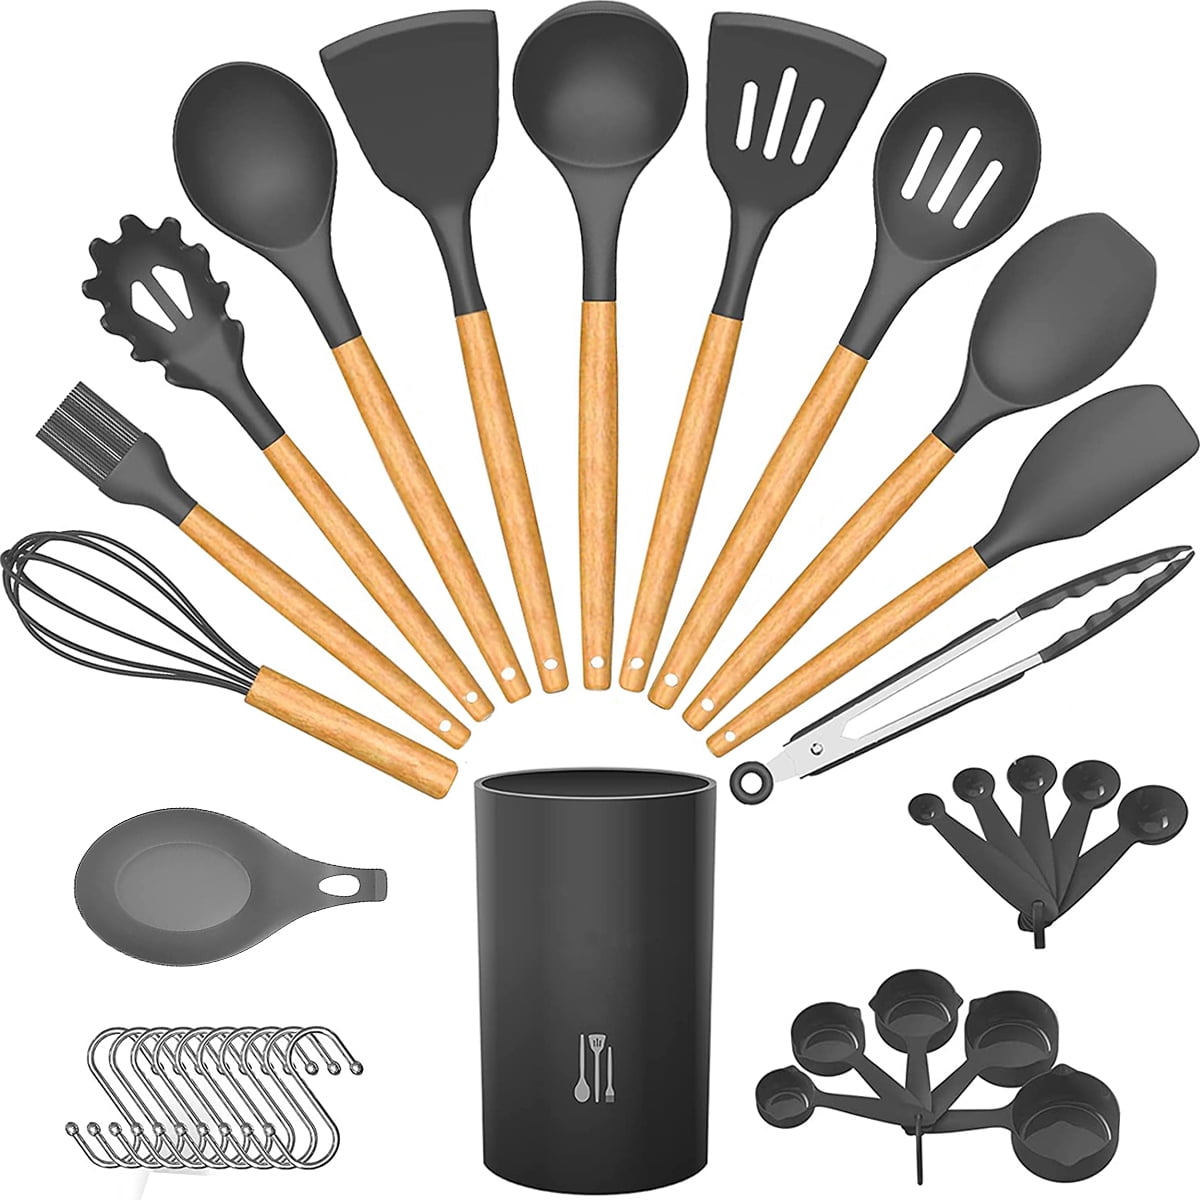 New Wooden Kitchen Utensils Set Eco-friendly & No Odor Silicone Cooking Spoons for Nonstick Cookware 